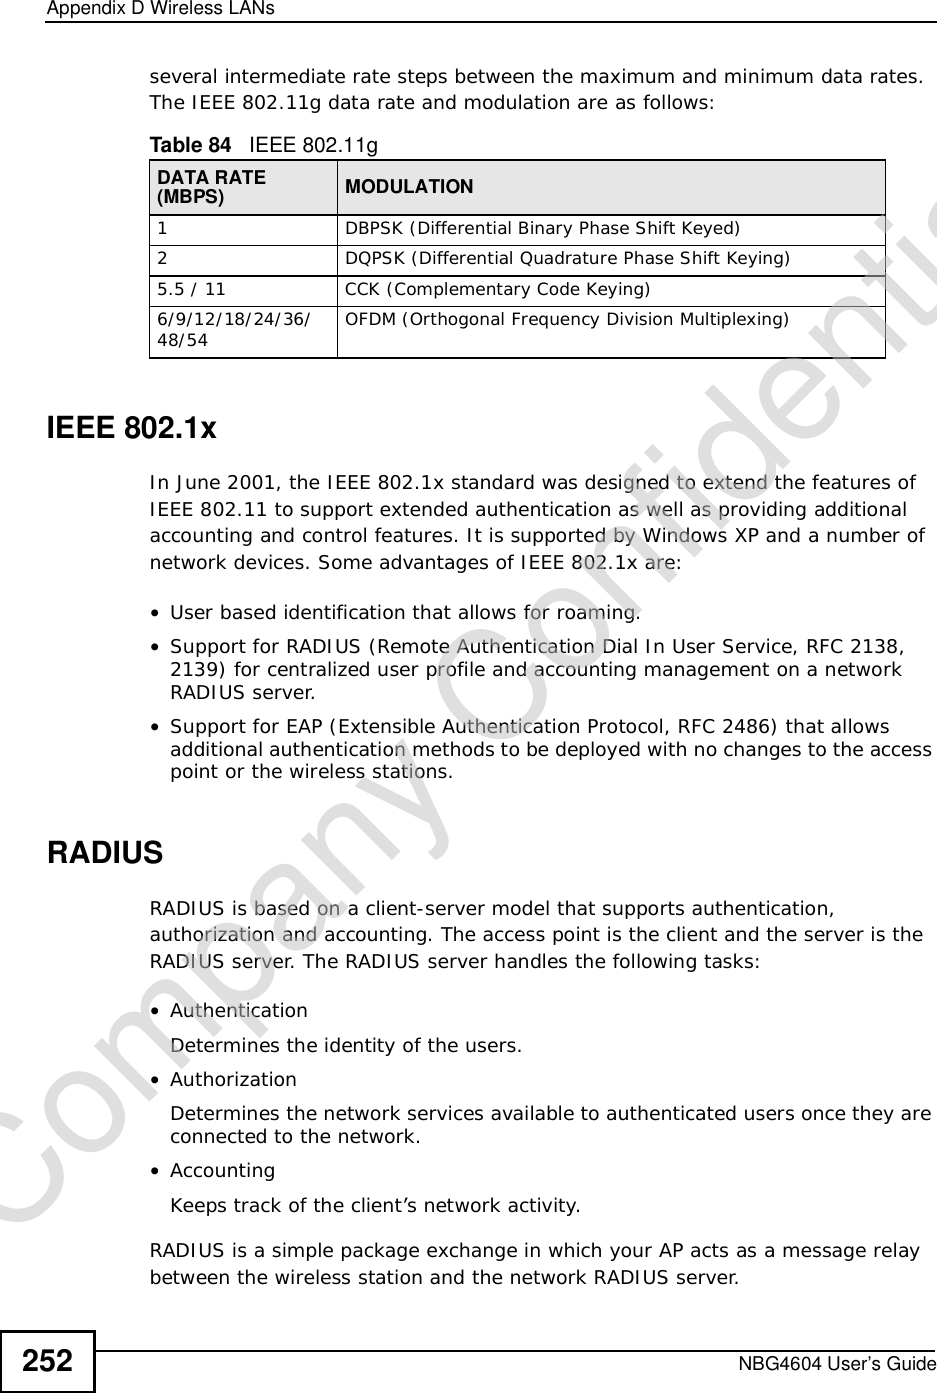 Appendix DWireless LANsNBG4604 User’s Guide252several intermediate rate steps between the maximum and minimum data rates. The IEEE 802.11g data rate and modulation are as follows:IEEE 802.1xIn June 2001, the IEEE 802.1x standard was designed to extend the features of IEEE 802.11 to support extended authentication as well as providing additional accounting and control features. It is supported by Windows XP and a number of network devices. Some advantages of IEEE 802.1x are:•User based identification that allows for roaming.•Support for RADIUS (Remote Authentication Dial In User Service, RFC 2138, 2139) for centralized user profile and accounting management on a network RADIUS server. •Support for EAP (Extensible Authentication Protocol, RFC 2486) that allows additional authentication methods to be deployed with no changes to the access point or the wireless stations. RADIUSRADIUS is based on a client-server model that supports authentication, authorization and accounting. The access point is the client and the server is the RADIUS server. The RADIUS server handles the following tasks:•Authentication Determines the identity of the users.•AuthorizationDetermines the network services available to authenticated users once they are connected to the network.•AccountingKeeps track of the client’s network activity. RADIUS is a simple package exchange in which your AP acts as a message relay between the wireless station and the network RADIUS server. Table 84   IEEE 802.11gDATA RATE (MBPS) MODULATION1DBPSK (Differential Binary Phase Shift Keyed)2DQPSK (Differential Quadrature Phase Shift Keying)5.5 / 11CCK (Complementary Code Keying) 6/9/12/18/24/36/48/54 OFDM (Orthogonal Frequency Division Multiplexing) Company Confidential